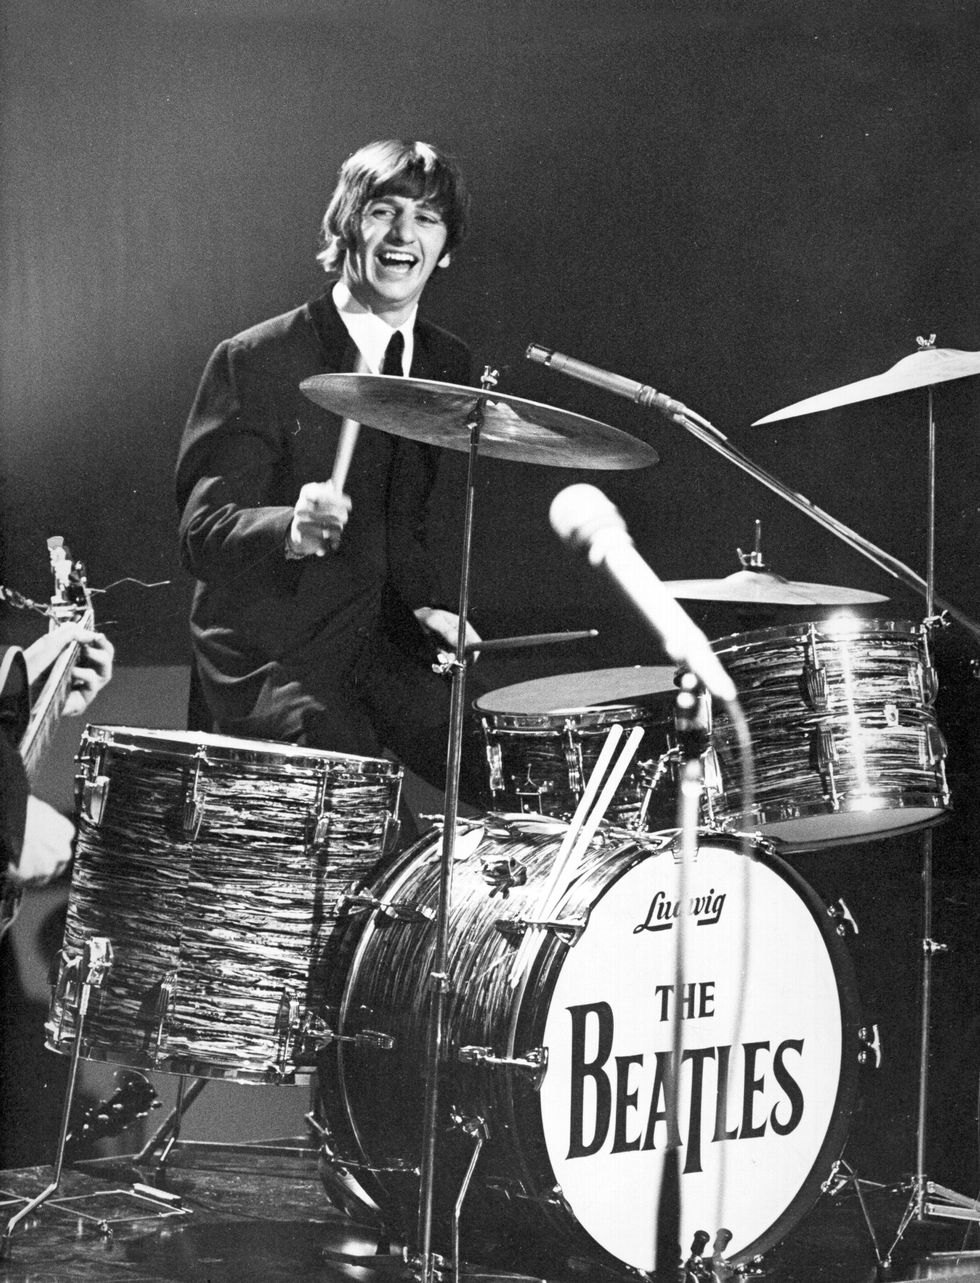 Ringo Starr in 1965 Photo By Michael Ochs Archives/Stringer/Getty Images